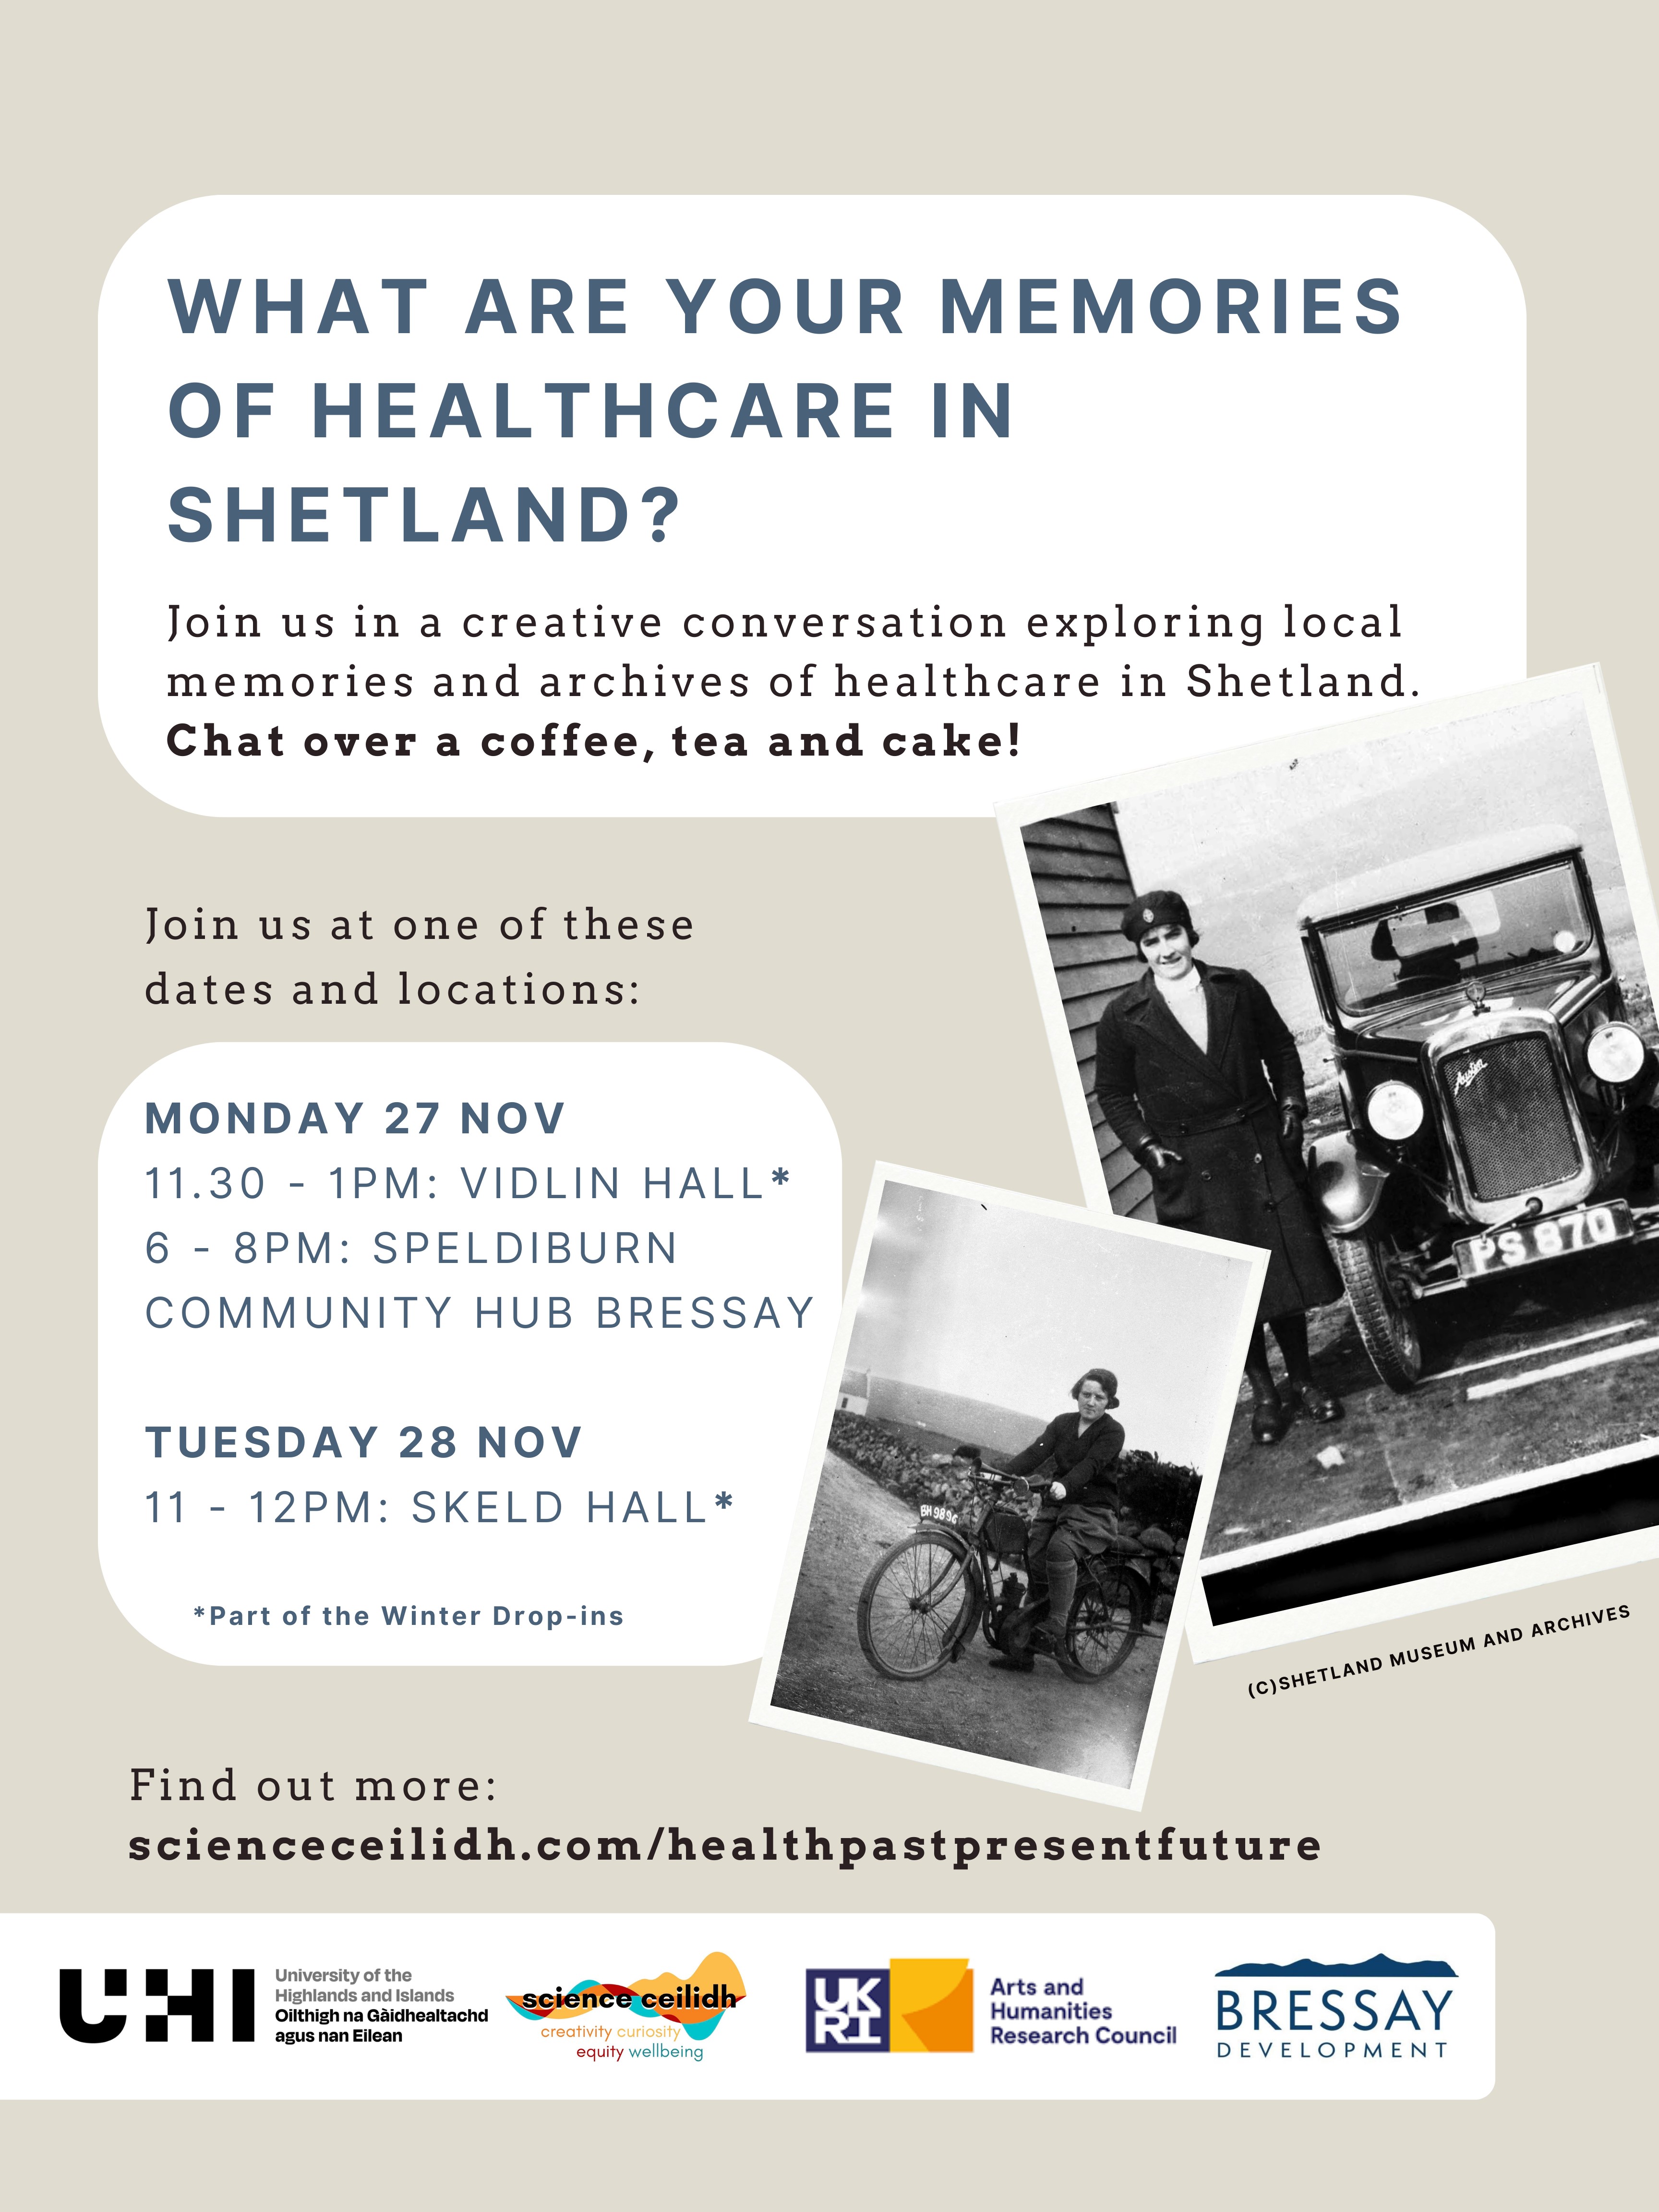 What are your memories of healthcare in Shetland | Join us in a creative conversation exploring local memories and archives of healthcare in Shetland | Chat over a coffee and a cake | Join us and one of these dates and locations | Monday 27 Nov 1130 - 1pm Vidlin Hall 6 - 8pm Speldiburn Community Hub Bressay | Tuesday 28 Nov 11 - 12pm Skeld Hall | Find out more sciencesceilidh.com/healthpastpresent